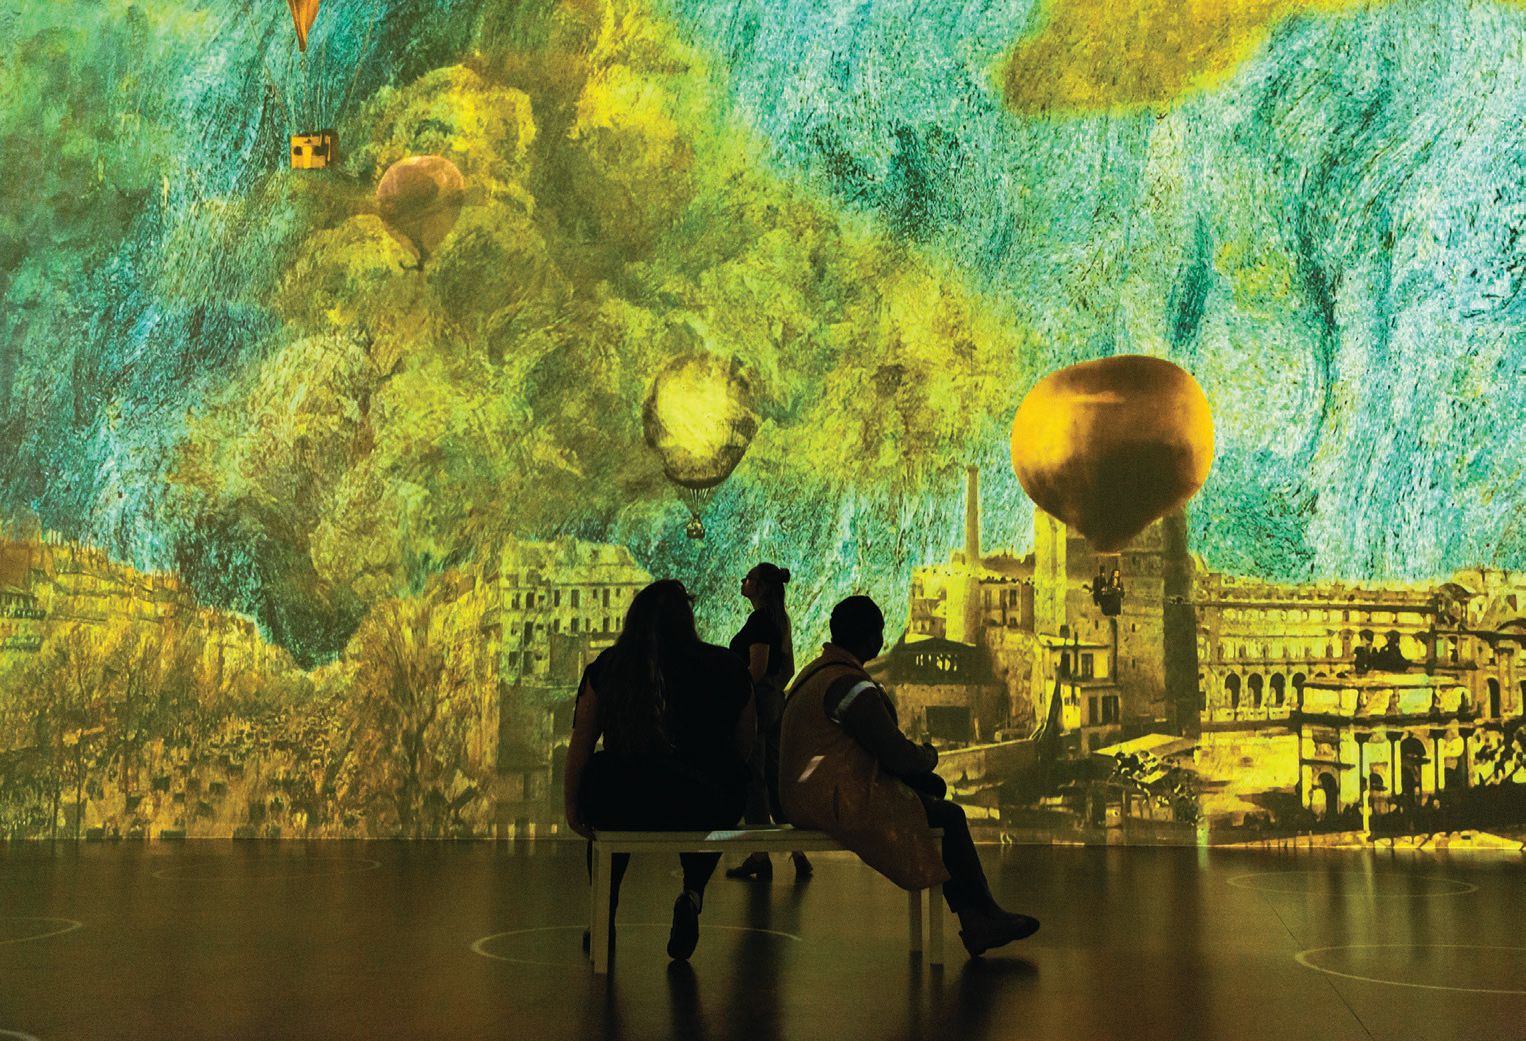 Adopt an impressionist point of view at this new experience. PHOTO BY PATRICK HODGON